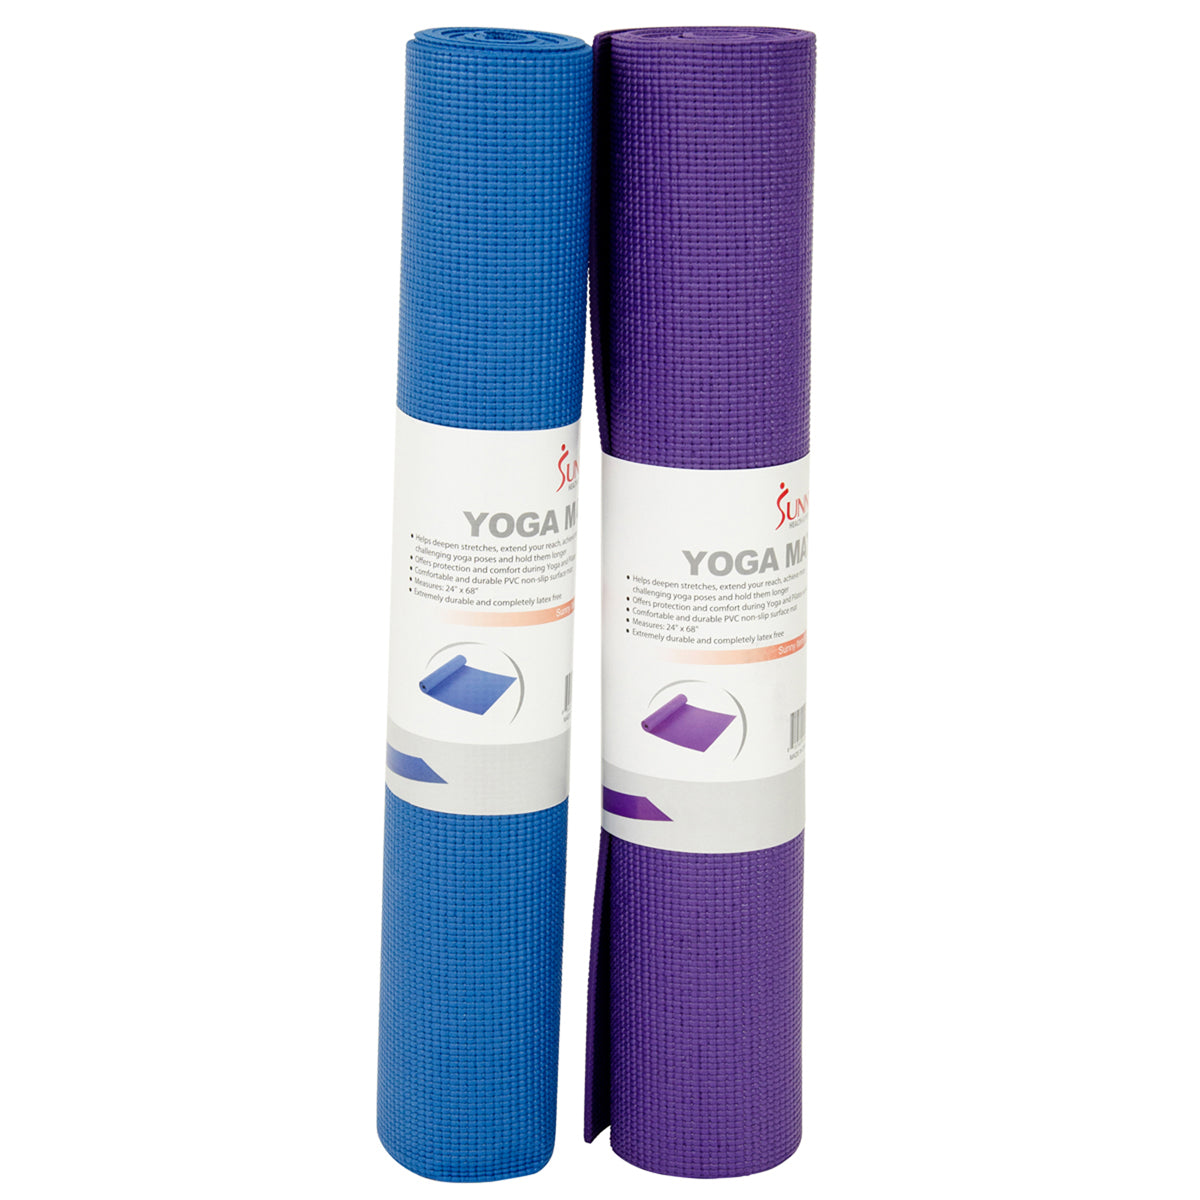 Buy Heathyoga Synergy Yoga Mat Non Slip Hot Yoga Mat, Yoga Towel & Mat 2in1  Lightweight & Optimal Cushioning 72x 26 Thickness 5mm Online at Lowest  Price Ever in India